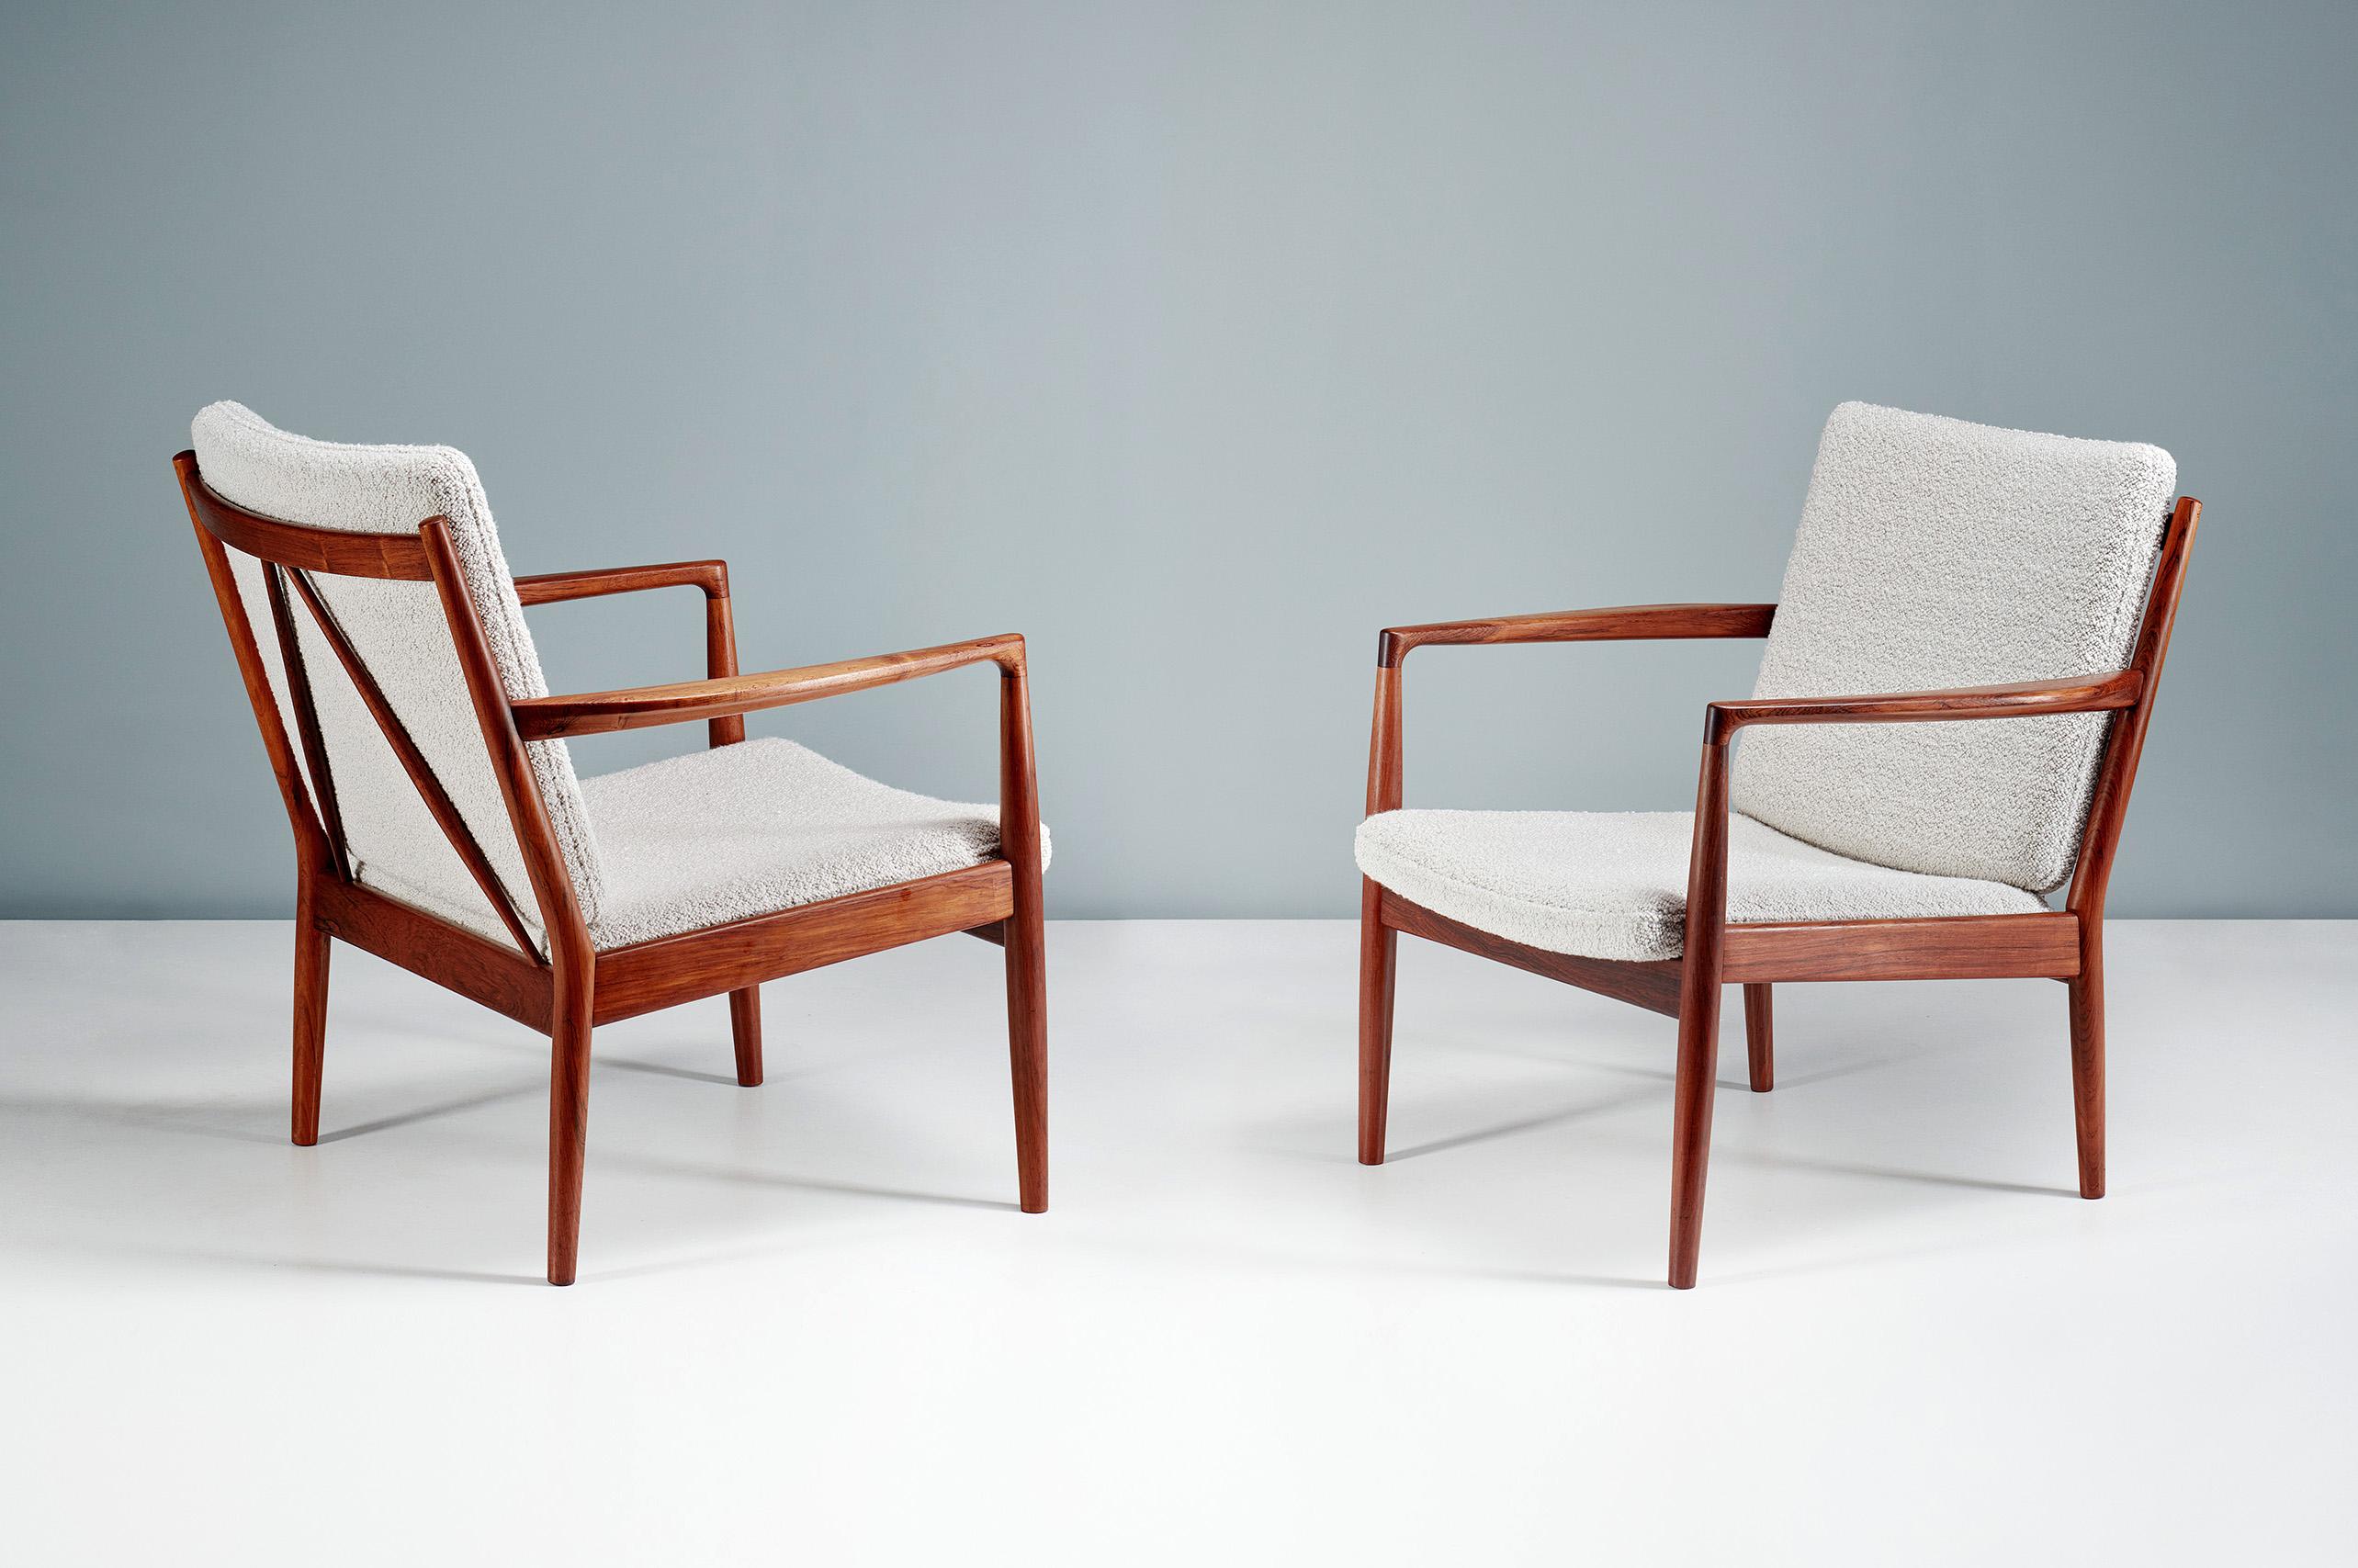 Steffen Syrach-Larsen - Lounge Chairs, c1960s

A pair of incredibly rare rosewood lounge chairs produced by Gustav Bertelsen in Denmark in the 1960s. The frames feature sculptural blade arms and angled back slats. The seat and back have been